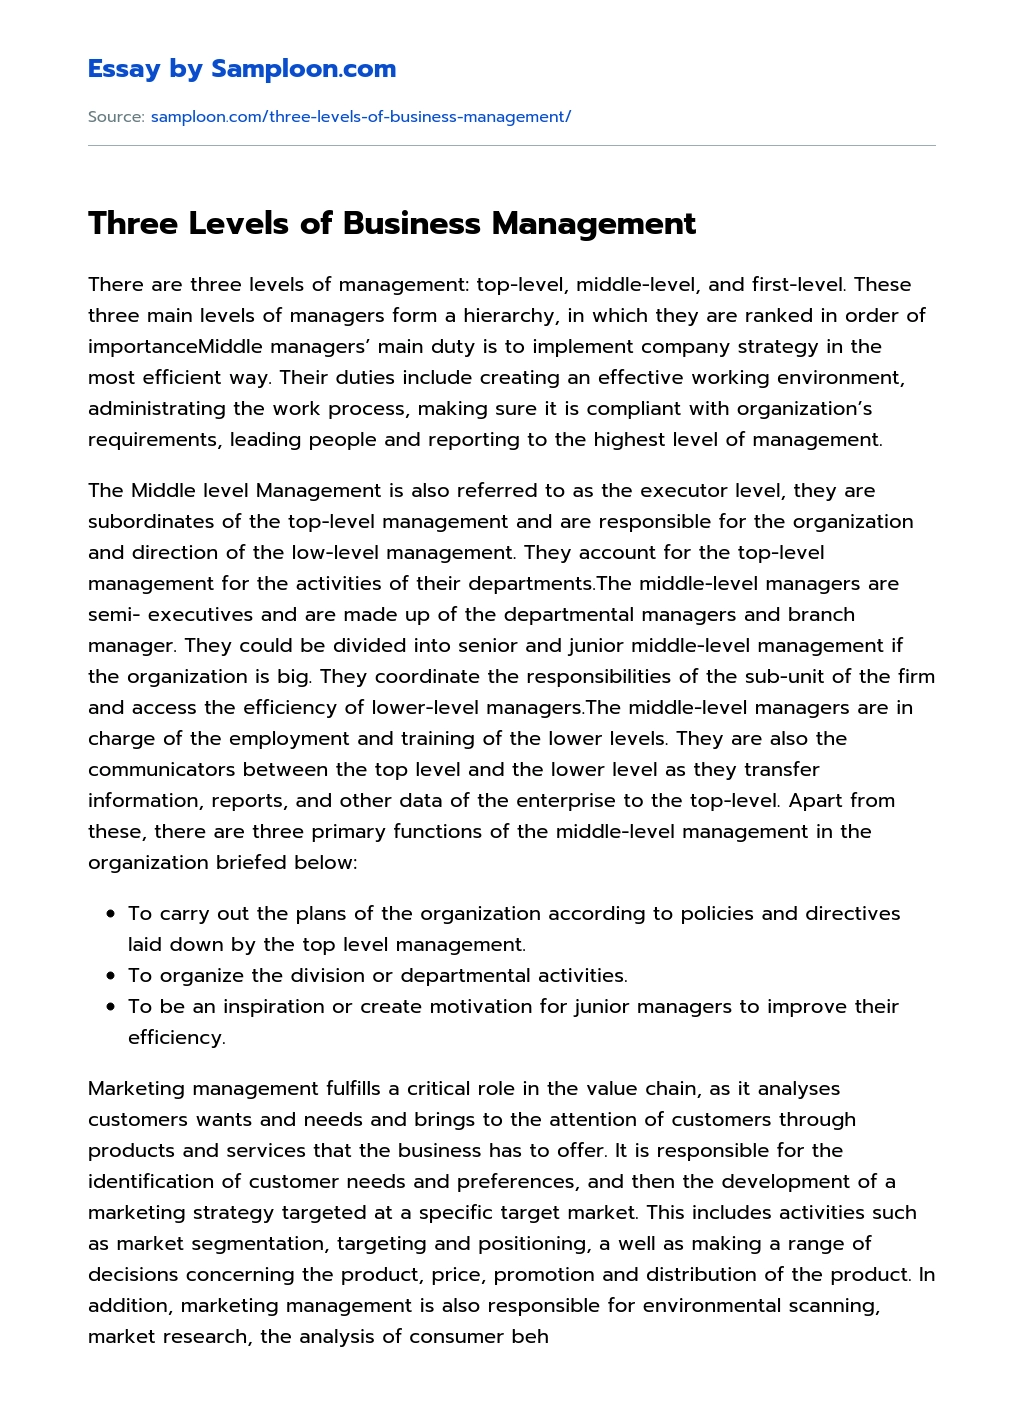 Three Levels of Business Management essay